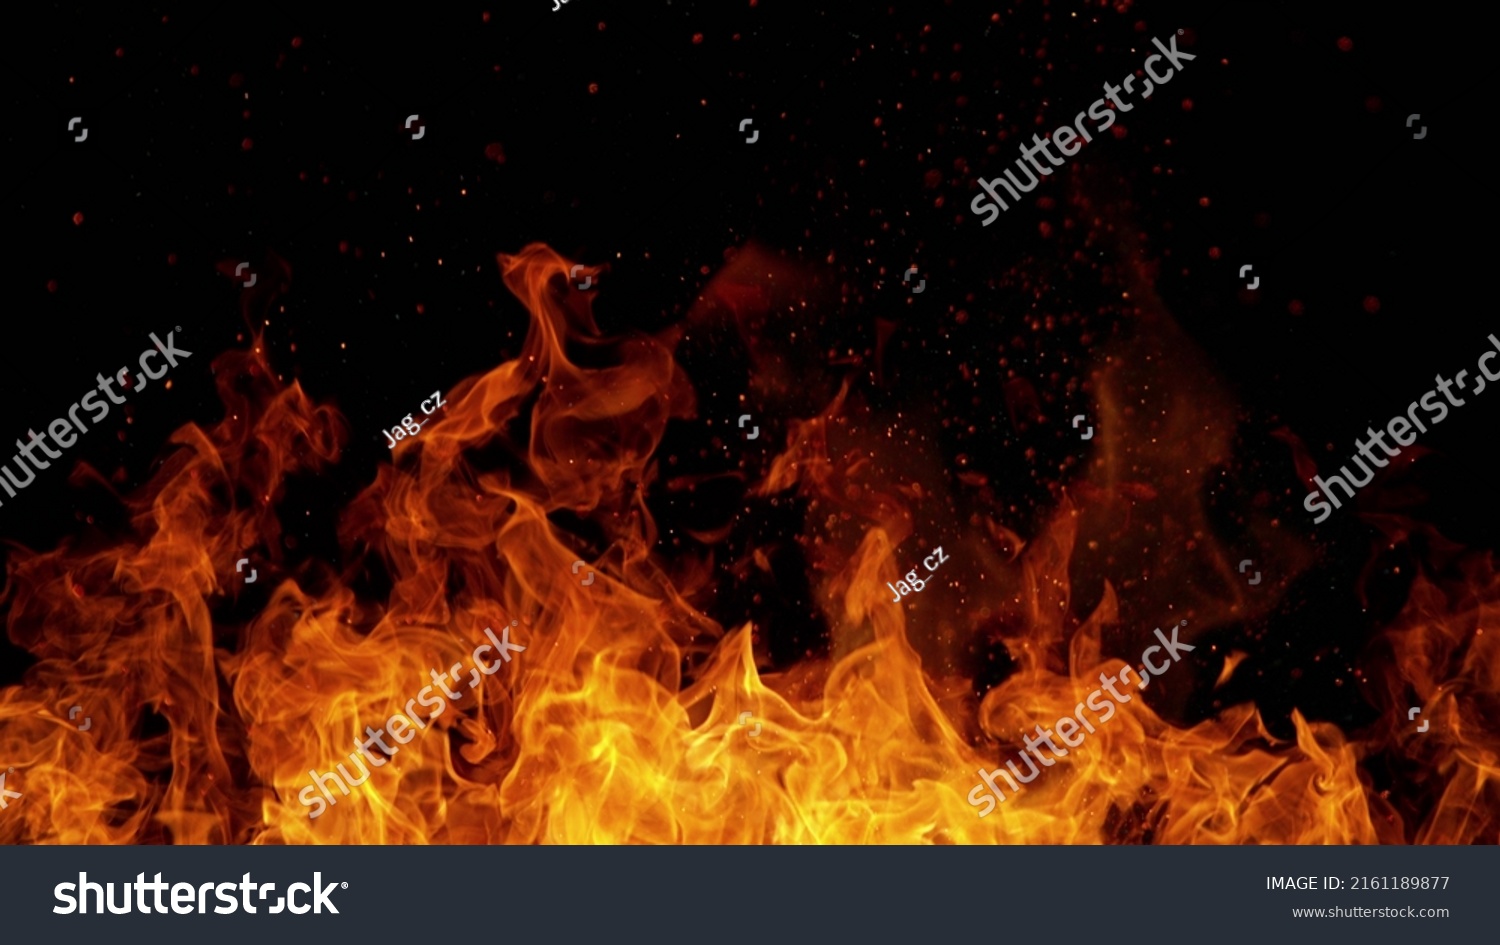 Fire abstract background with flames and copyspace. Isolated on black background. #2161189877